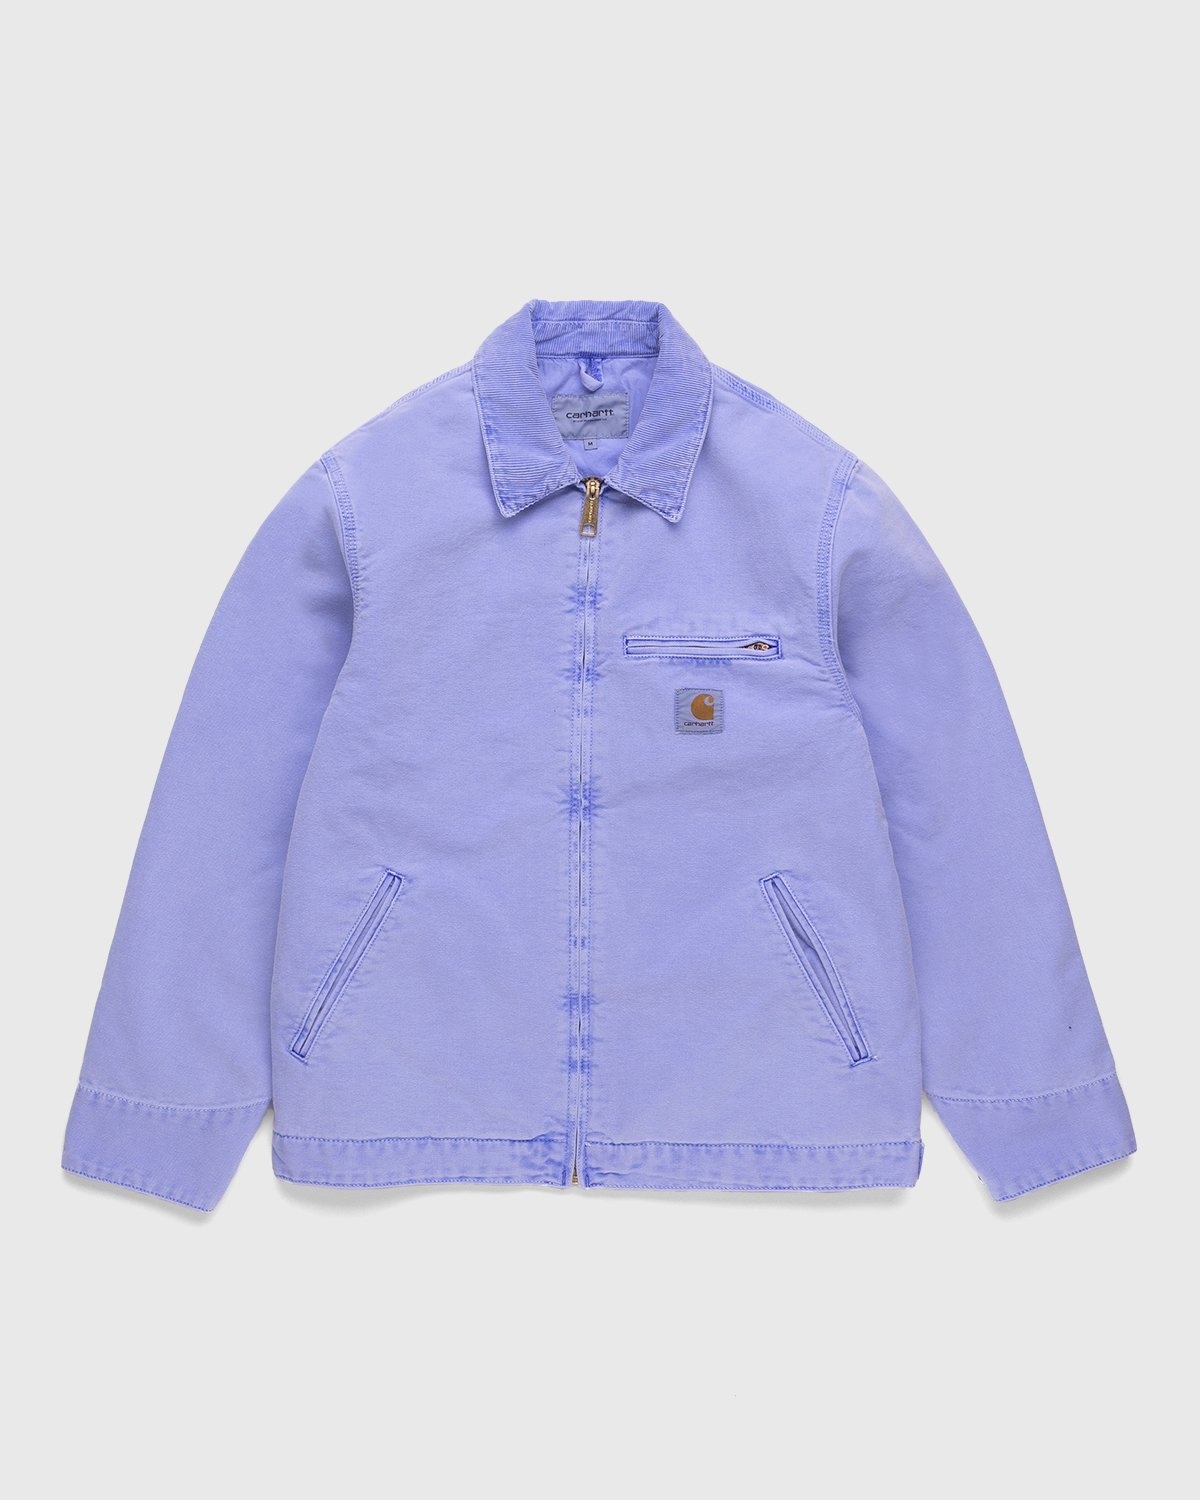 Carhartt WIP – Detroit Jacket Icy Water Faded - Jackets - Blue - Image 1